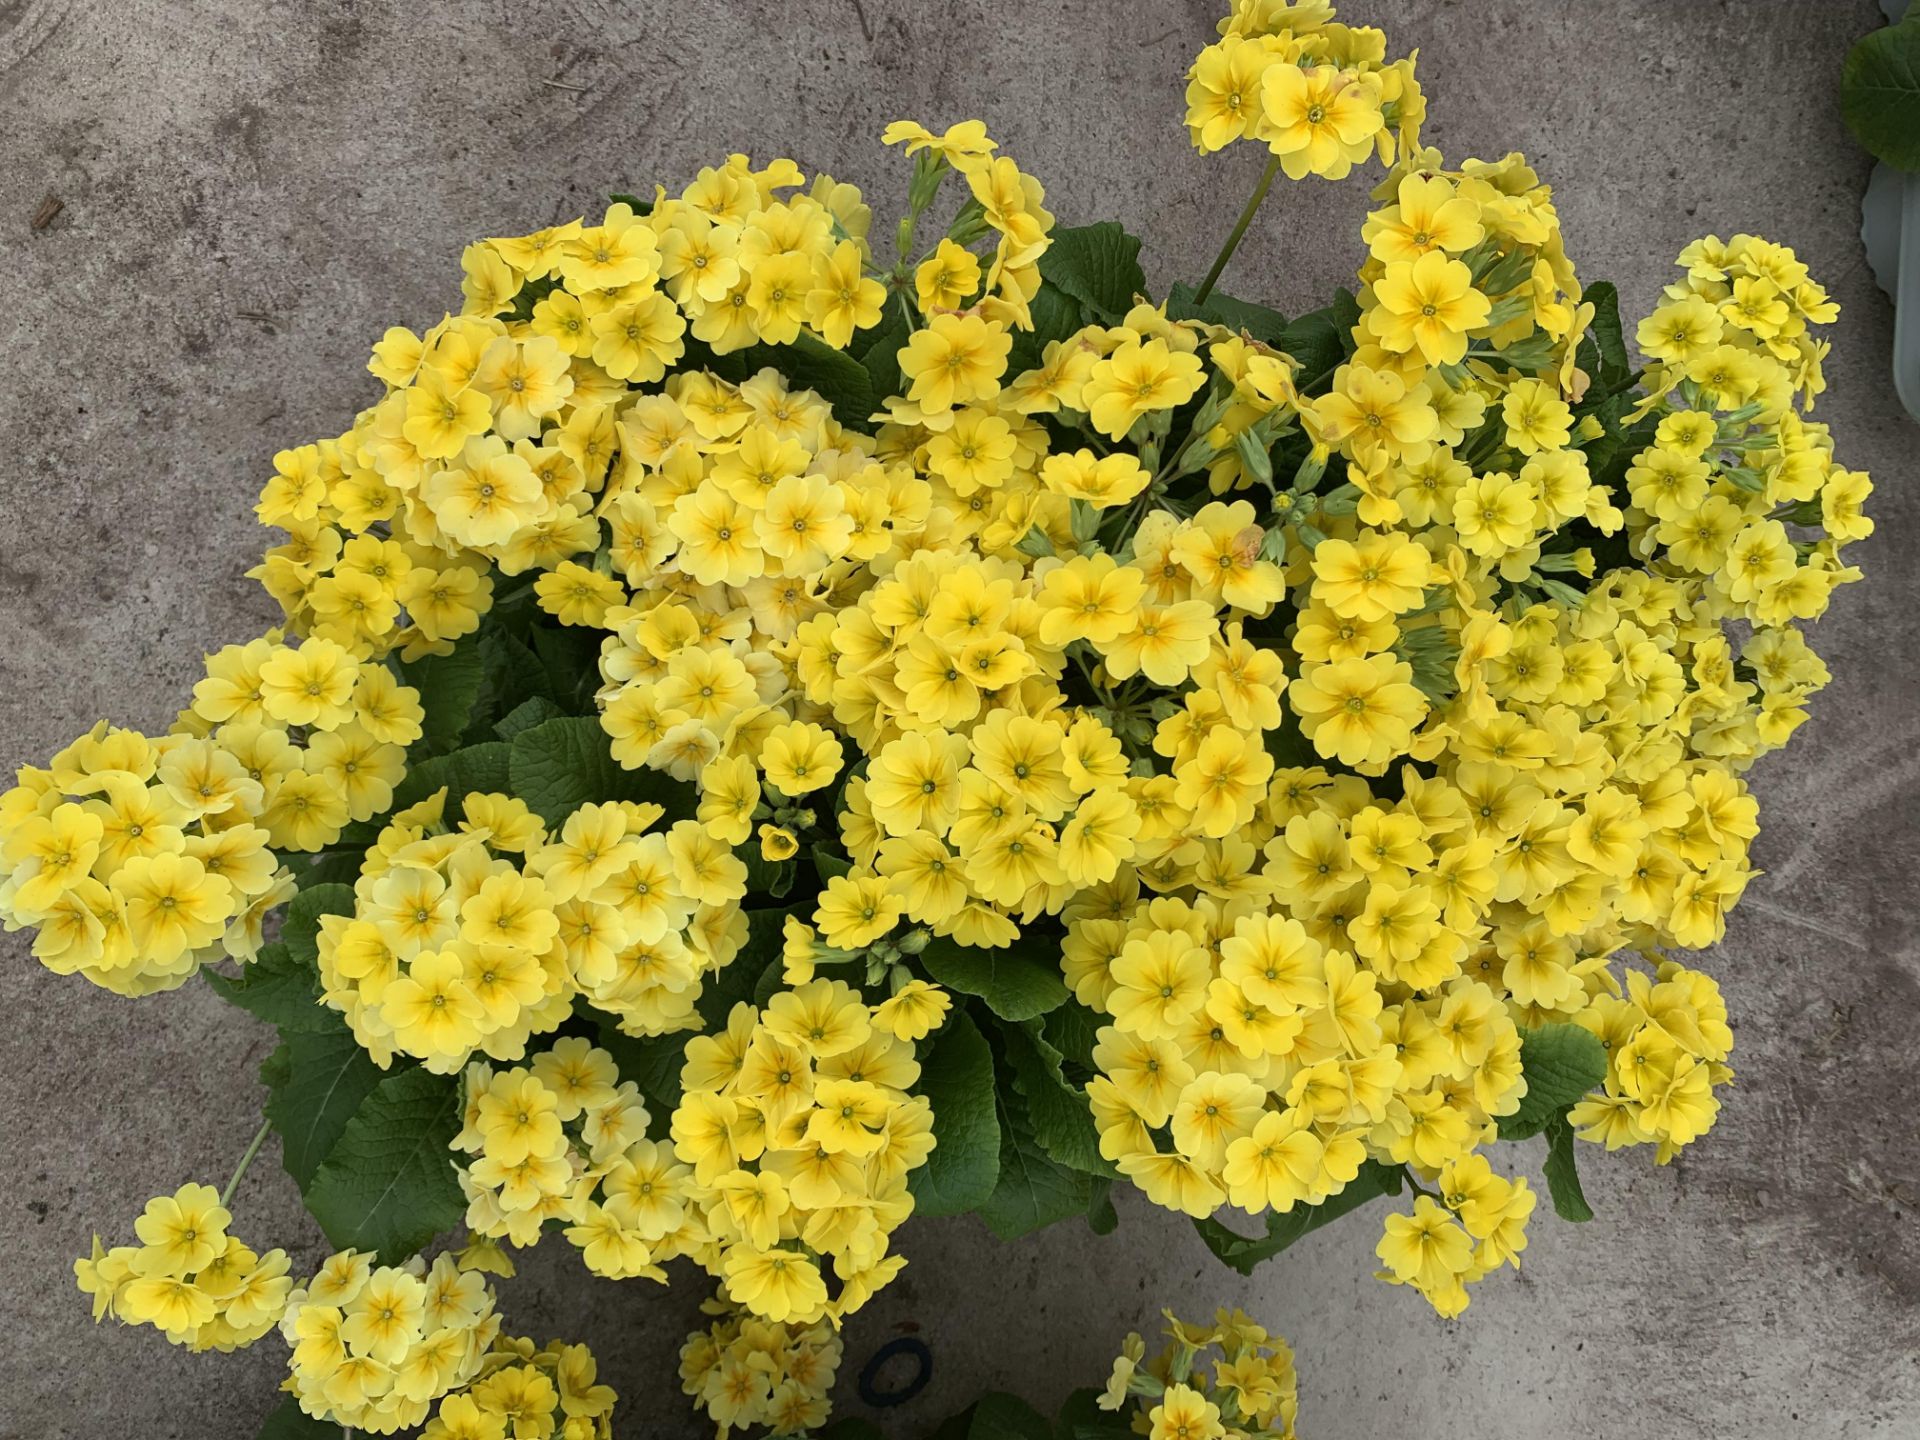 SIX GOLDEN NUGGET SCENTED YELLOW POLYANTHUS PLUS VAT TO BE SOLD FOR THE SIX